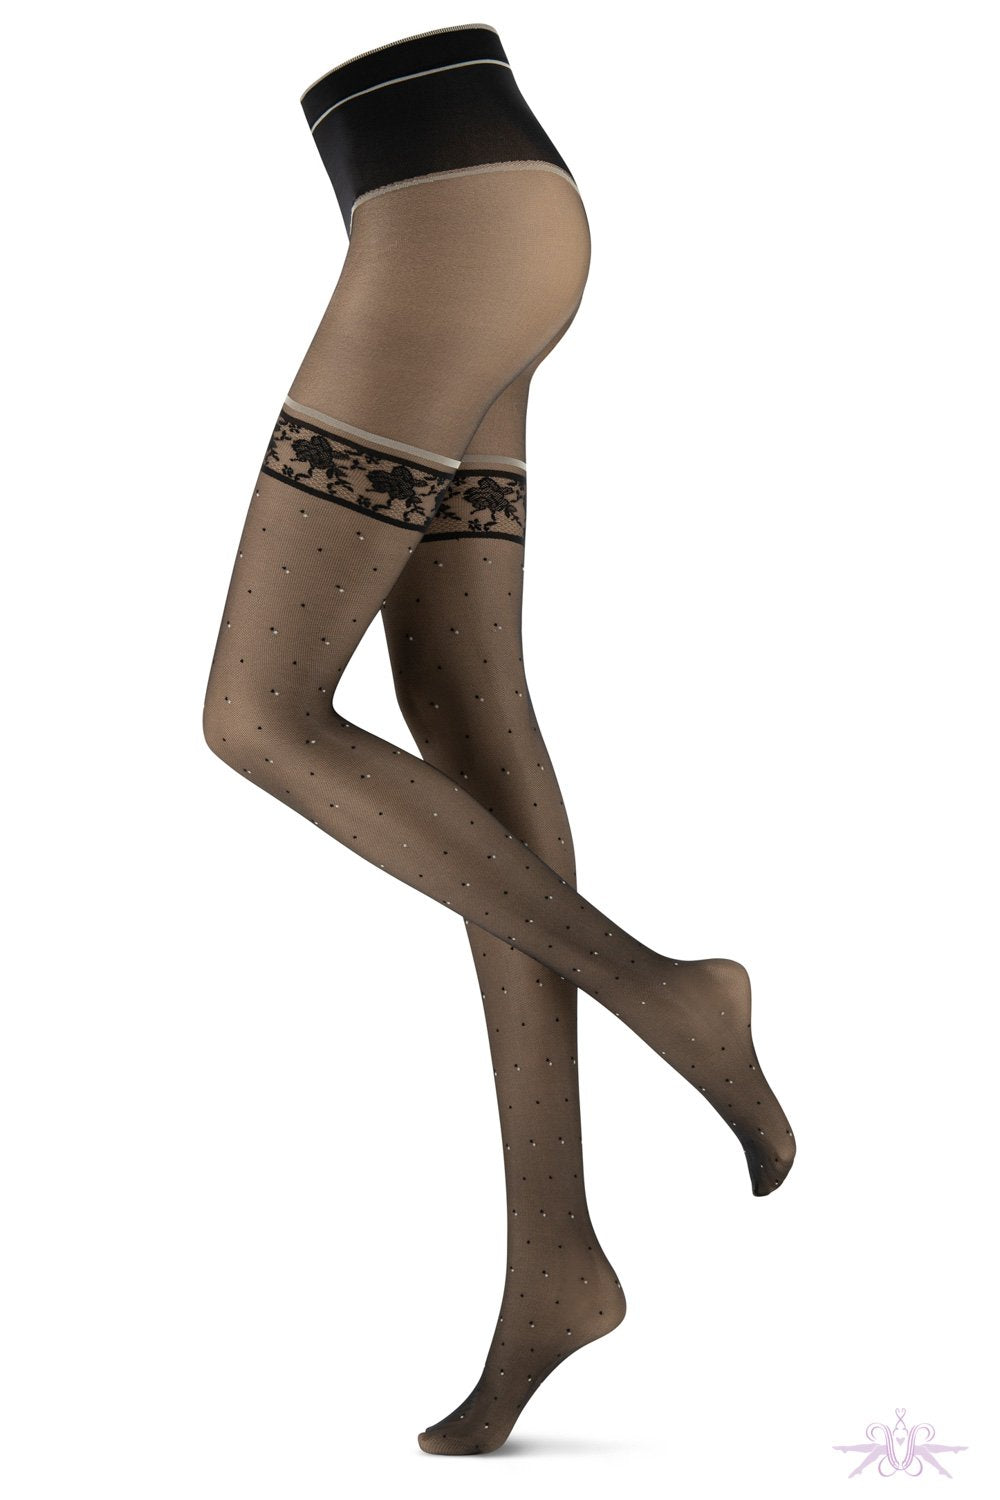 Couture 40 Denier Opaque Tights